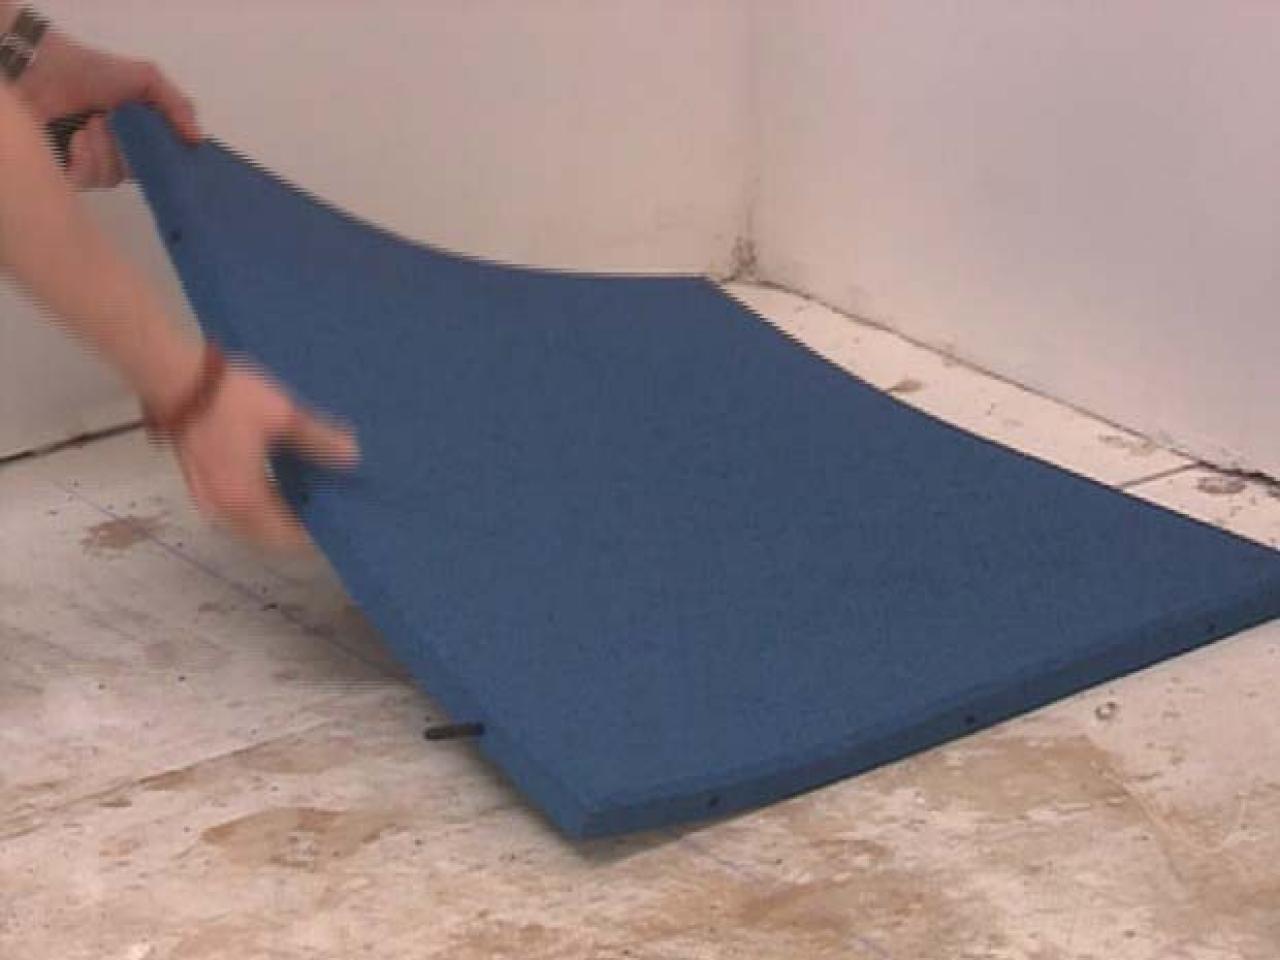 How To Install Rubber Tile Flooring, How To Install Rubber Flooring